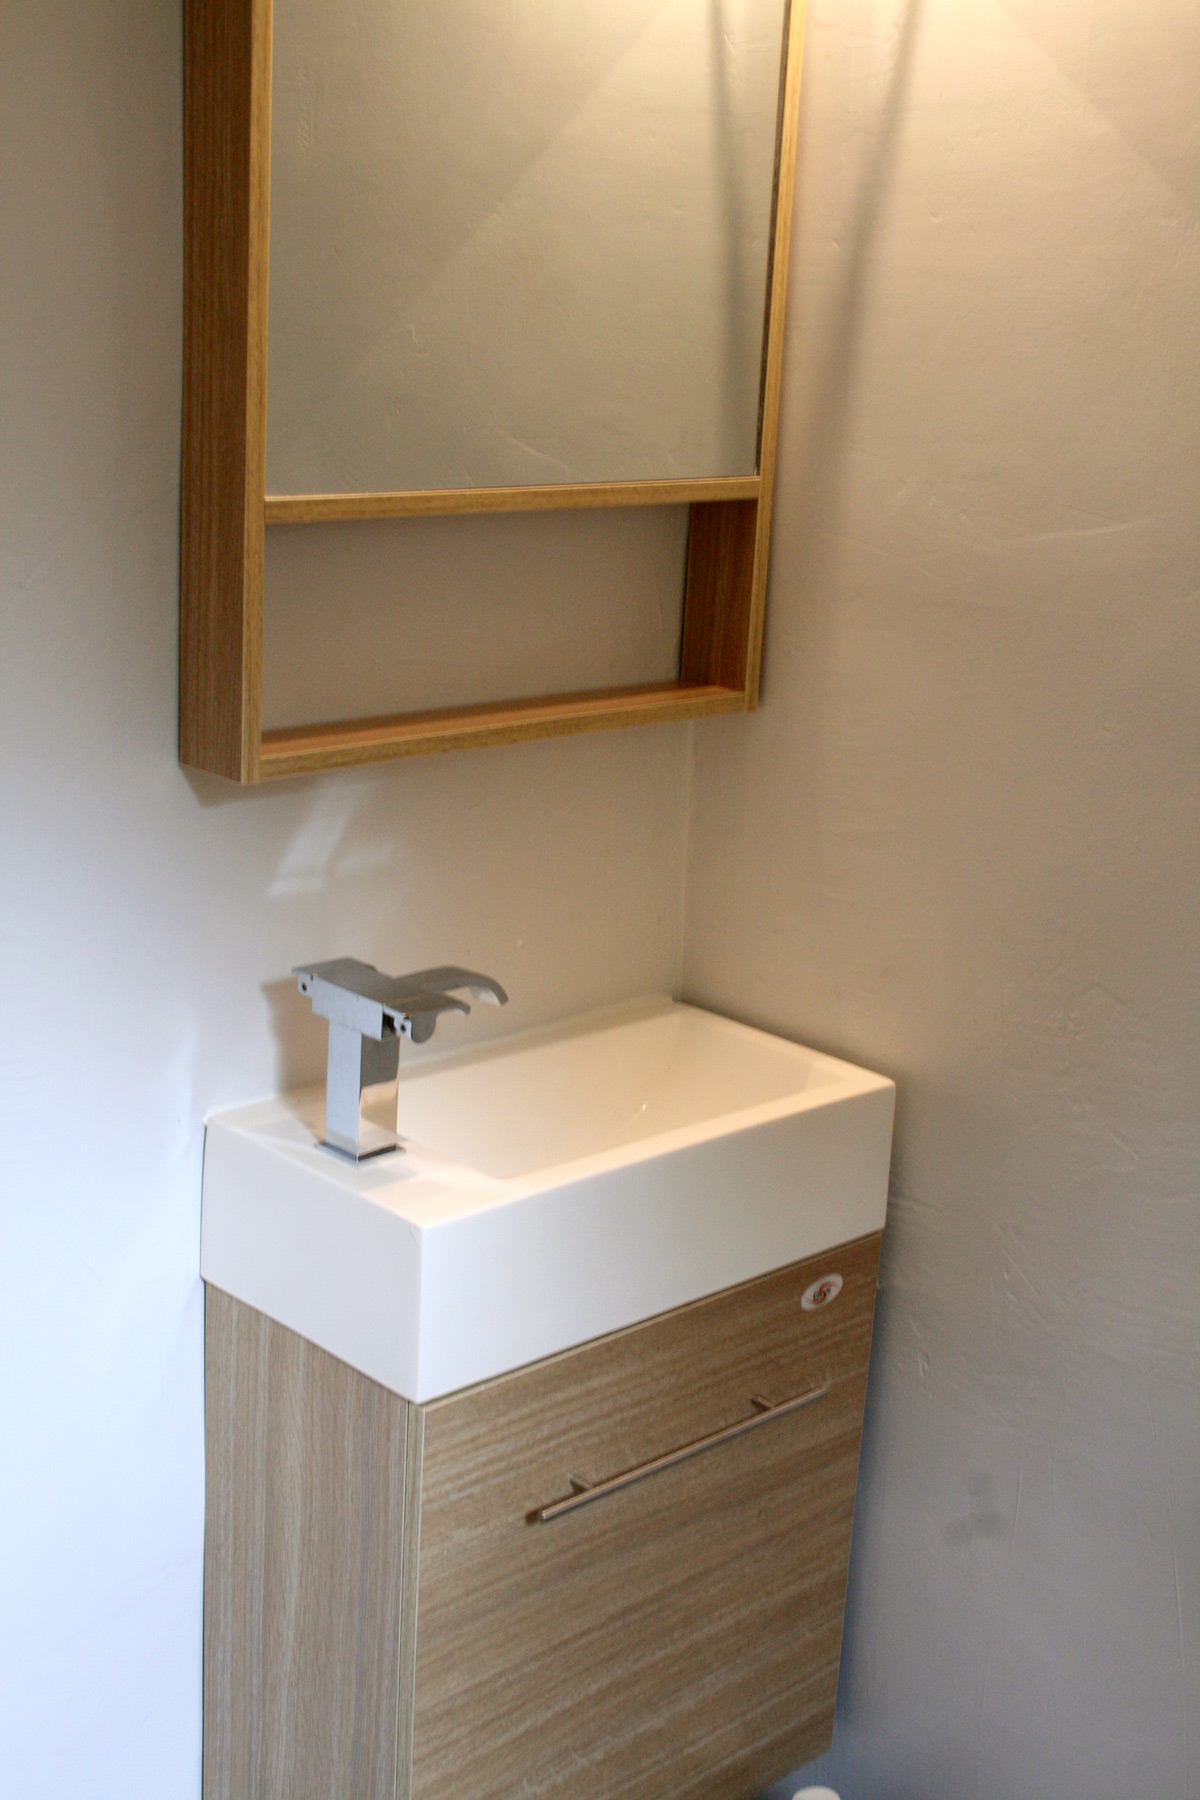 Italian style wall-mounted vanity at Guest Bathroom